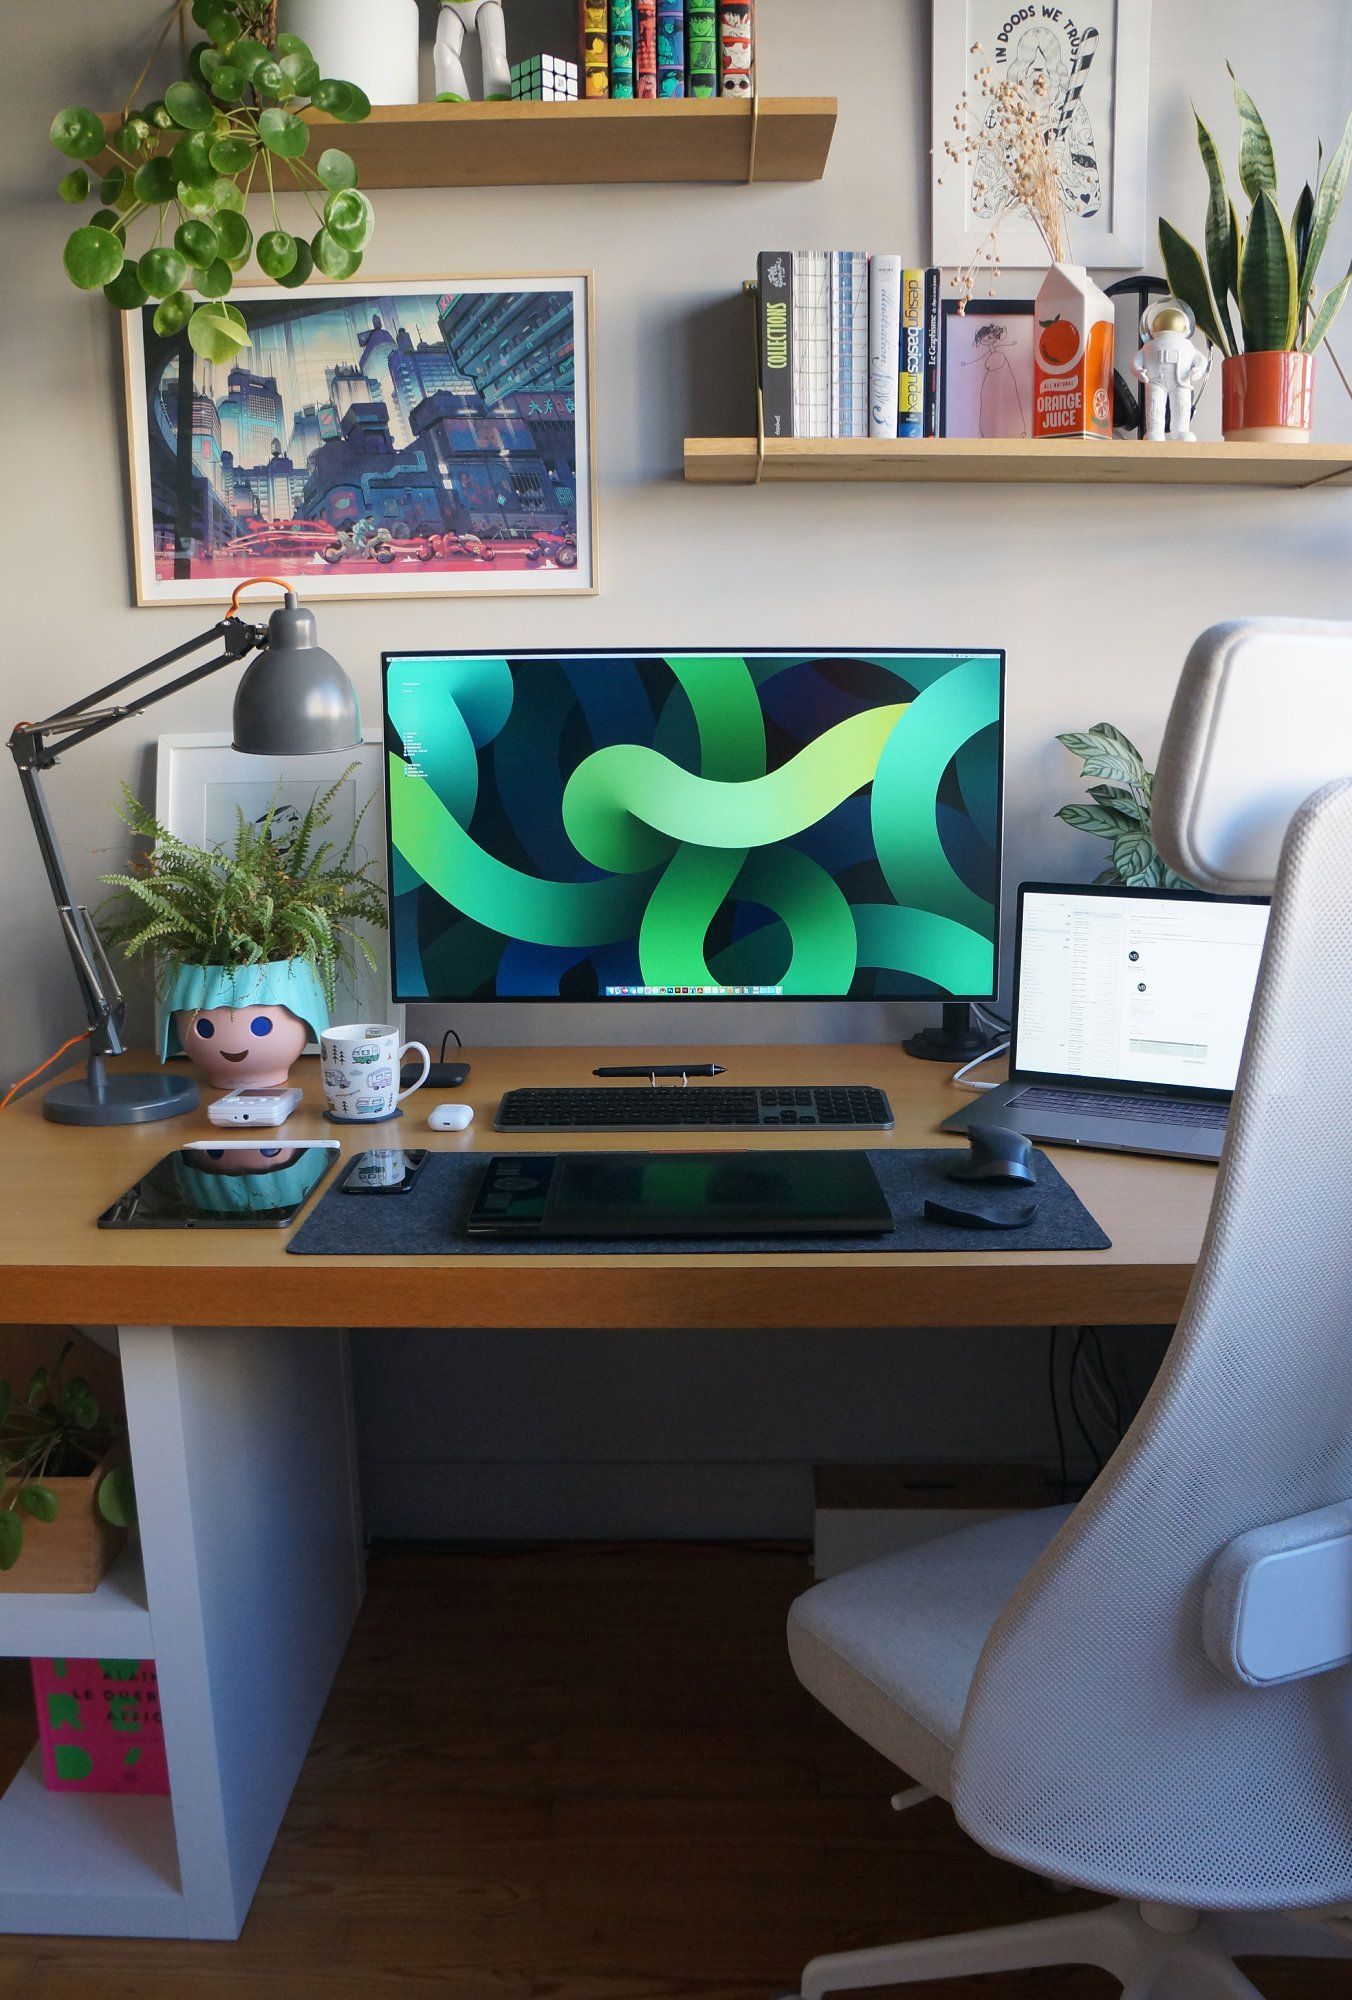 A neat and bright graphic design home office setup, featuring an LG monitor, a MacBook Pro, an IKEA JÄRVFJÄLLET office chair, bookshelves, plants, and a limited edition illustration Akira by Mathieu Bablet on the wall